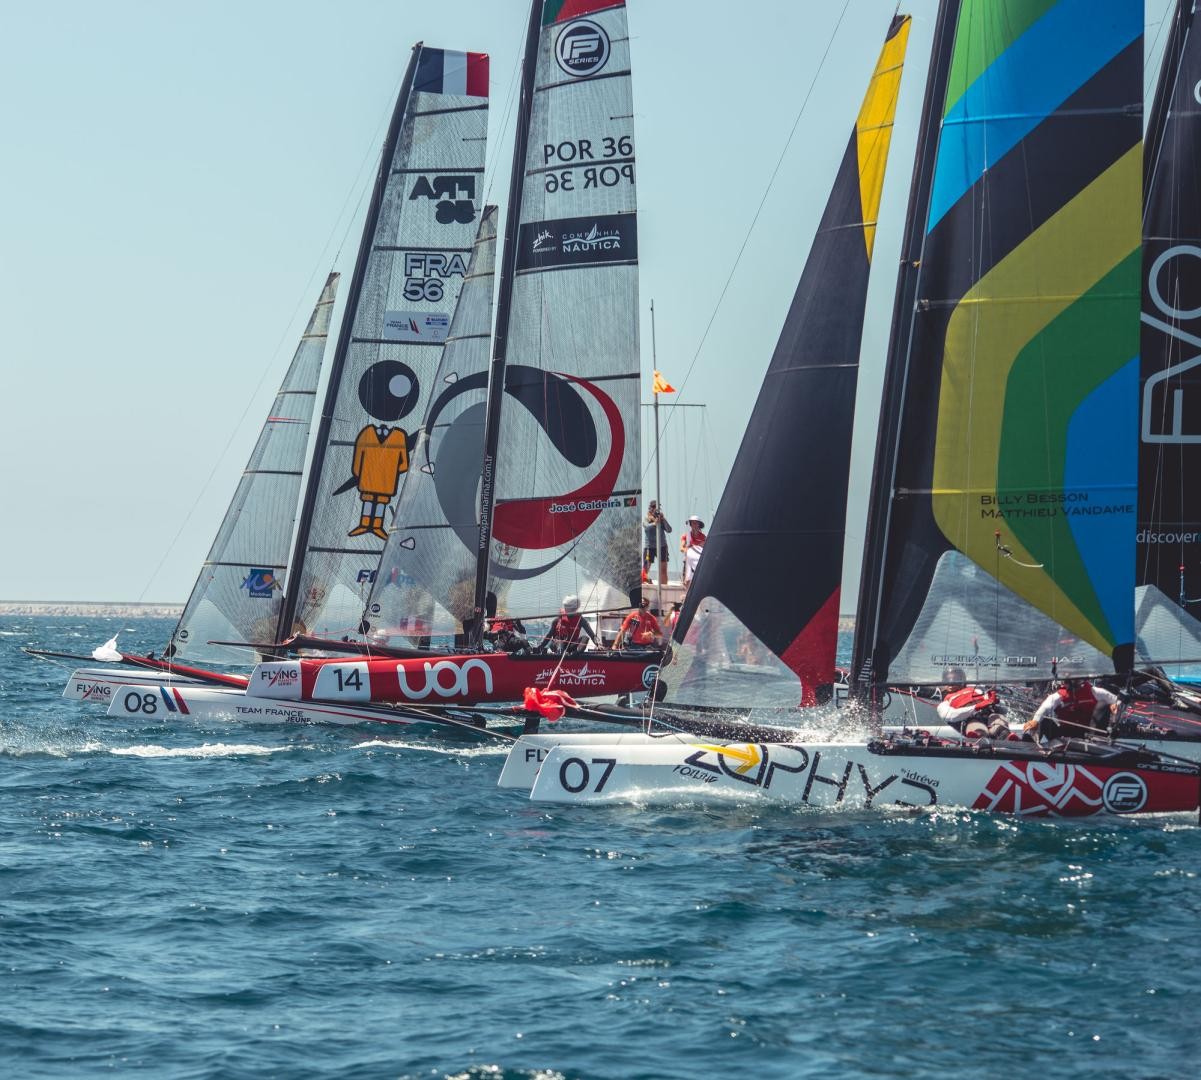 The twelve-strong international fleet of Flying Phantoms will descend upon Qingdao for the first time to participate in the first ever Qingdao Mazarin Cup